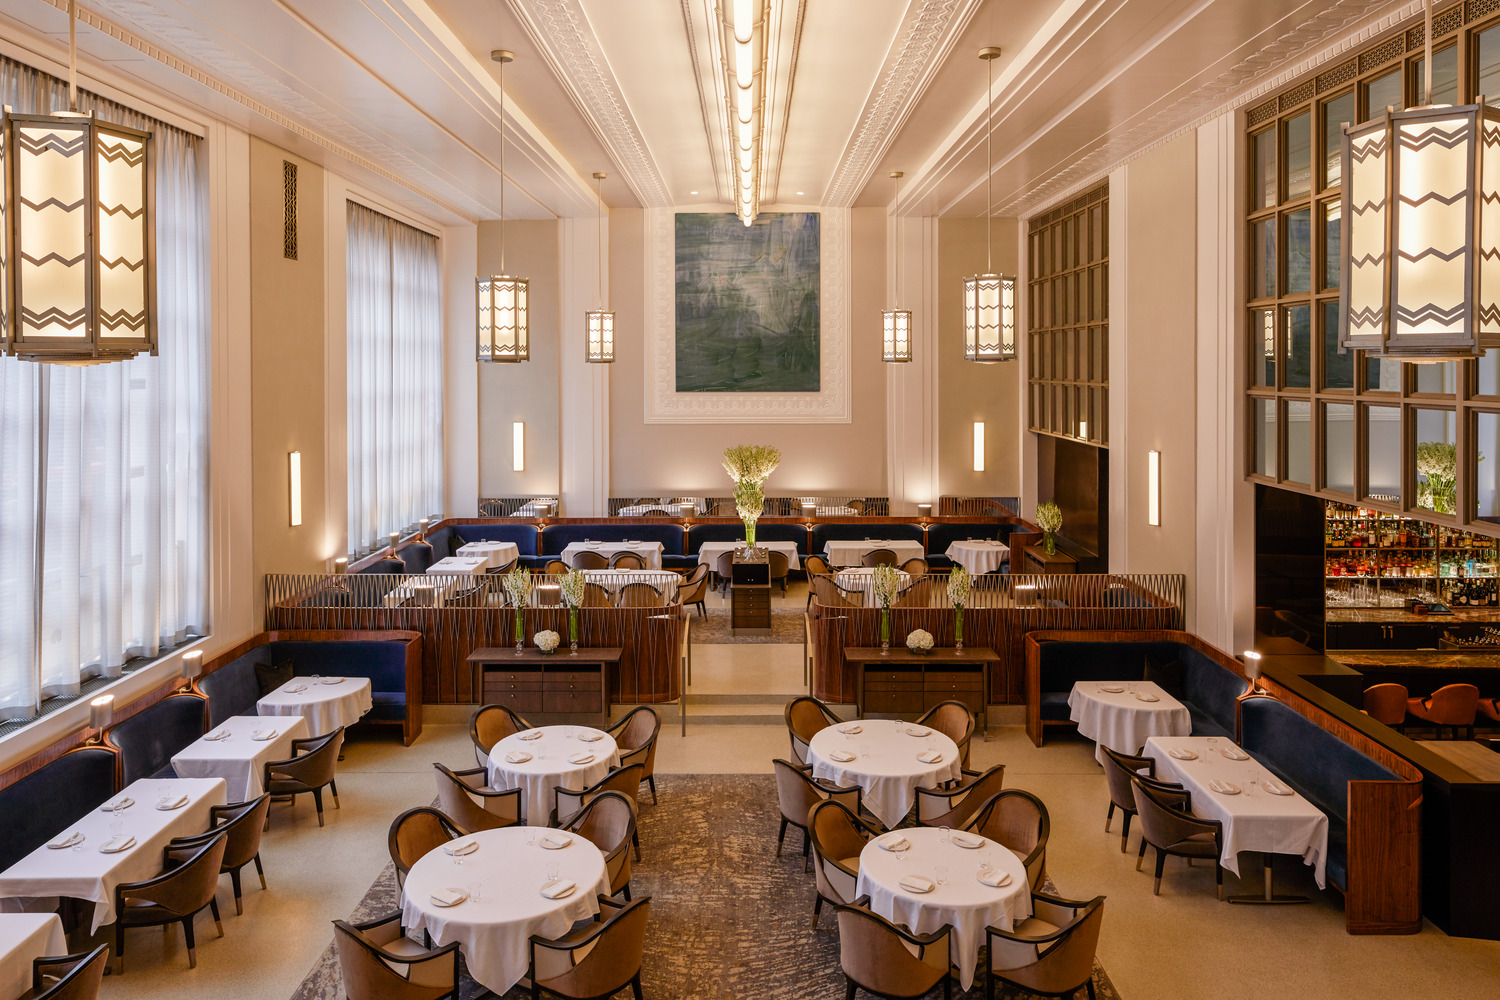 Architectural lighting at Eleven Madison Park